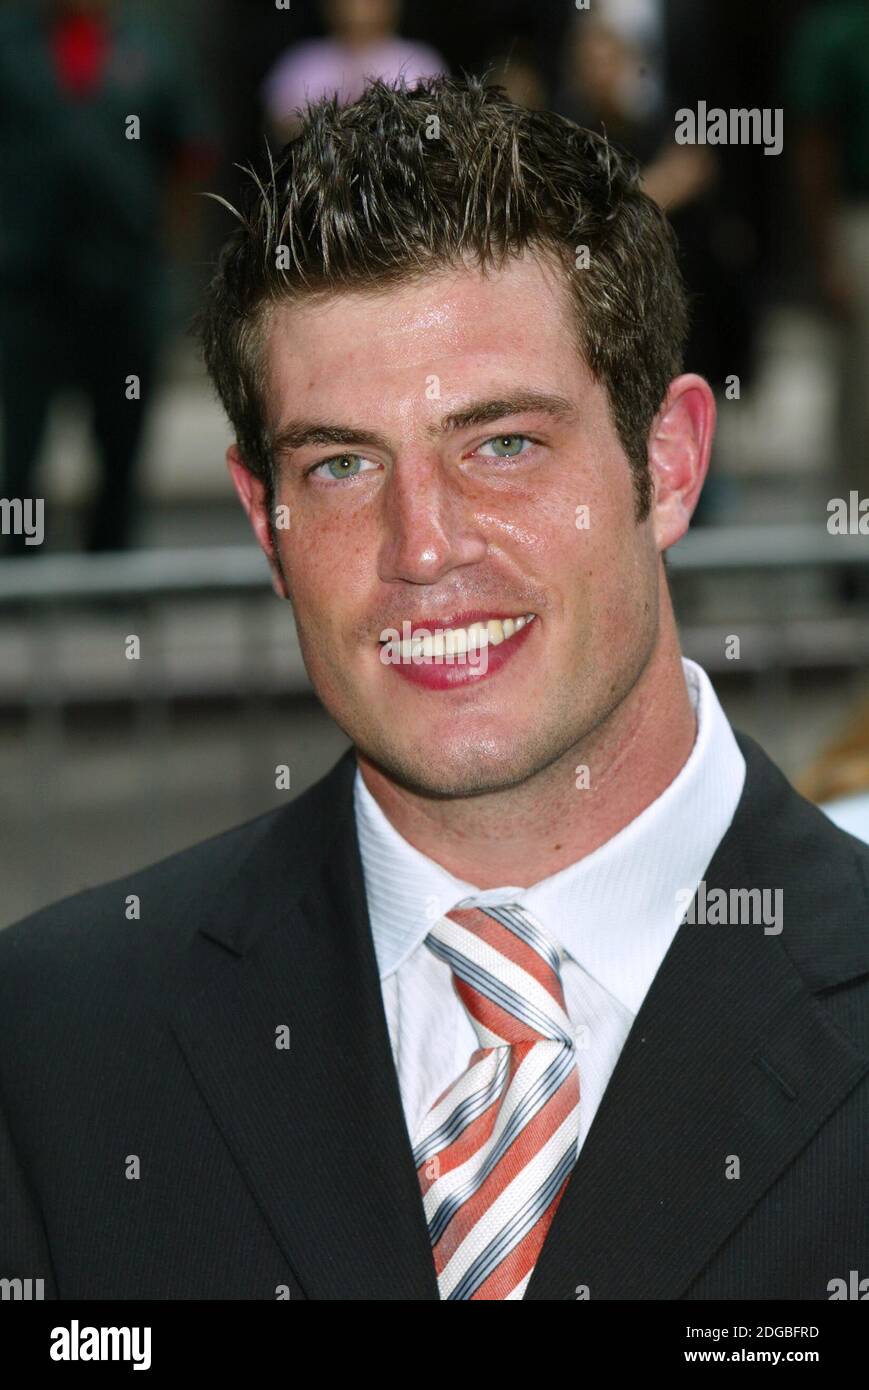 NEW YORK, NY- MAY 18: Jesse Palmer arrives at the 2004-05 ABC Network Upfront Presentation held at Cipriani’s, on May 18, 2004, in New York City. Credit: Joseph Marzullo/MediaPunch Stock Photo